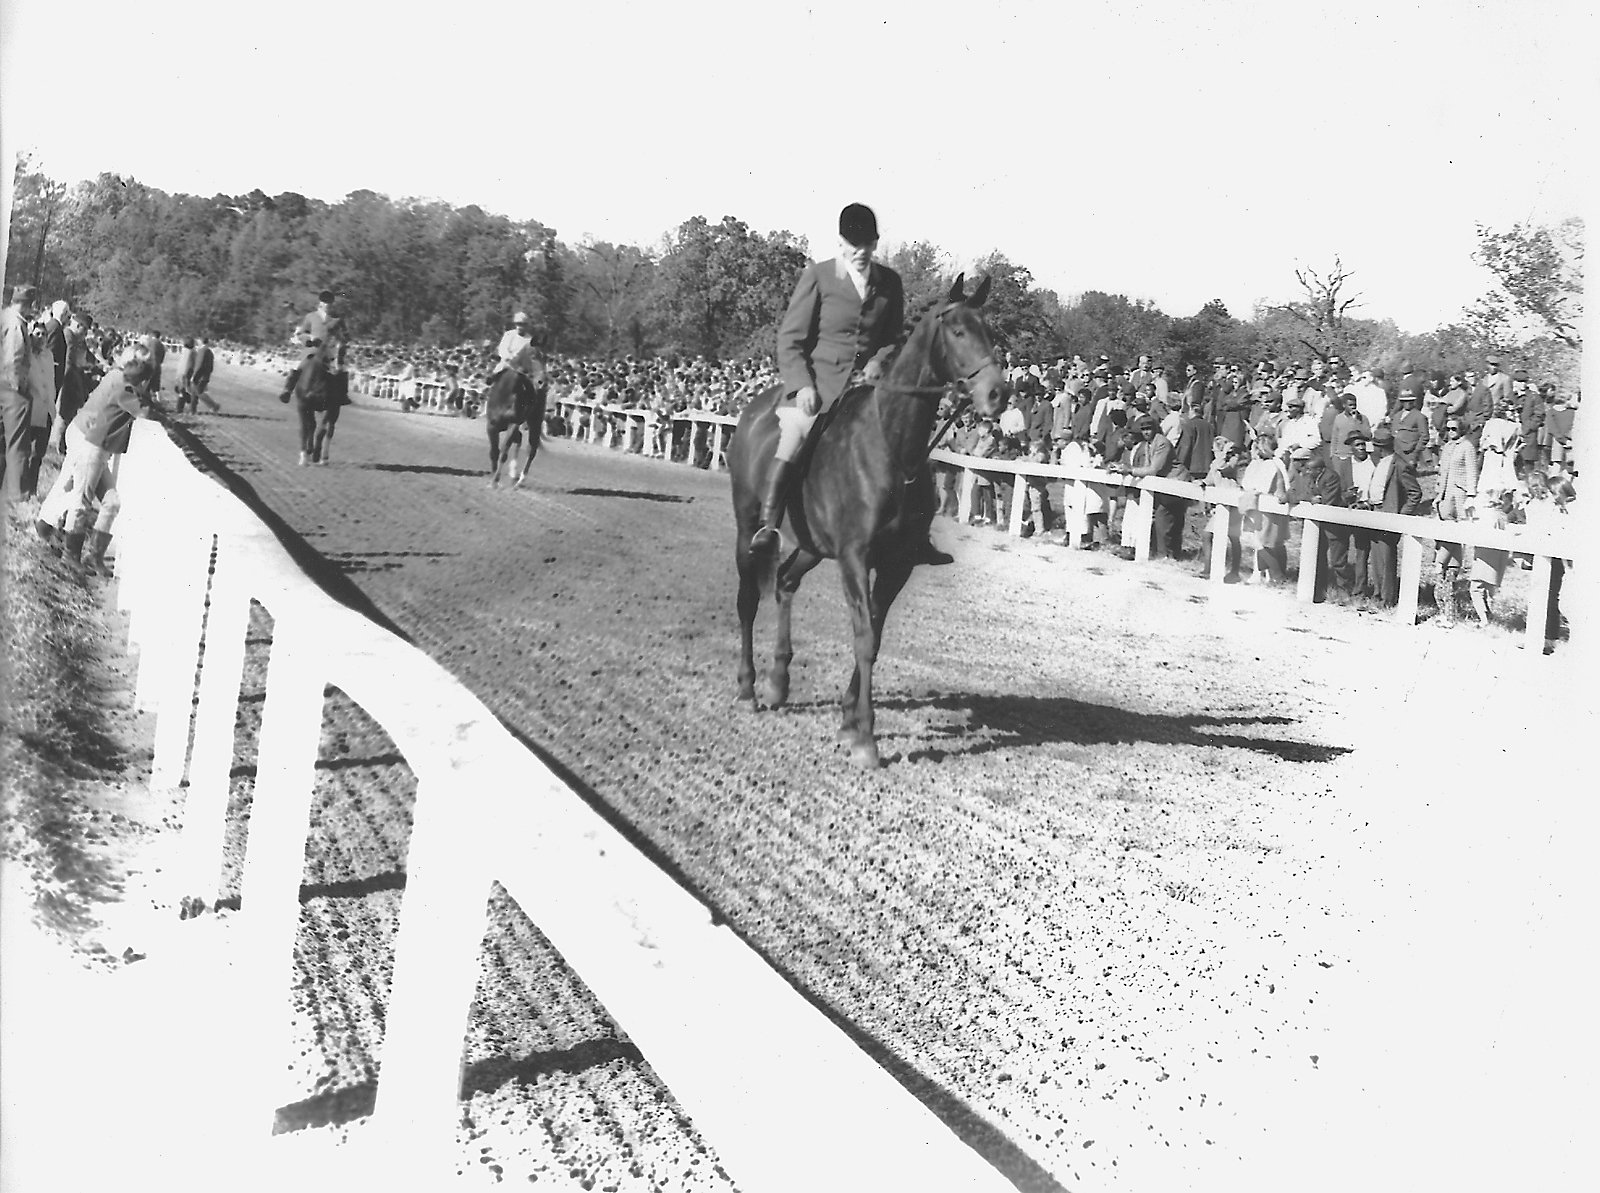   Link Brooking, long time Huntsman for Mrs. Scott,leads horses to the post as an outrider, c. 1960’s  